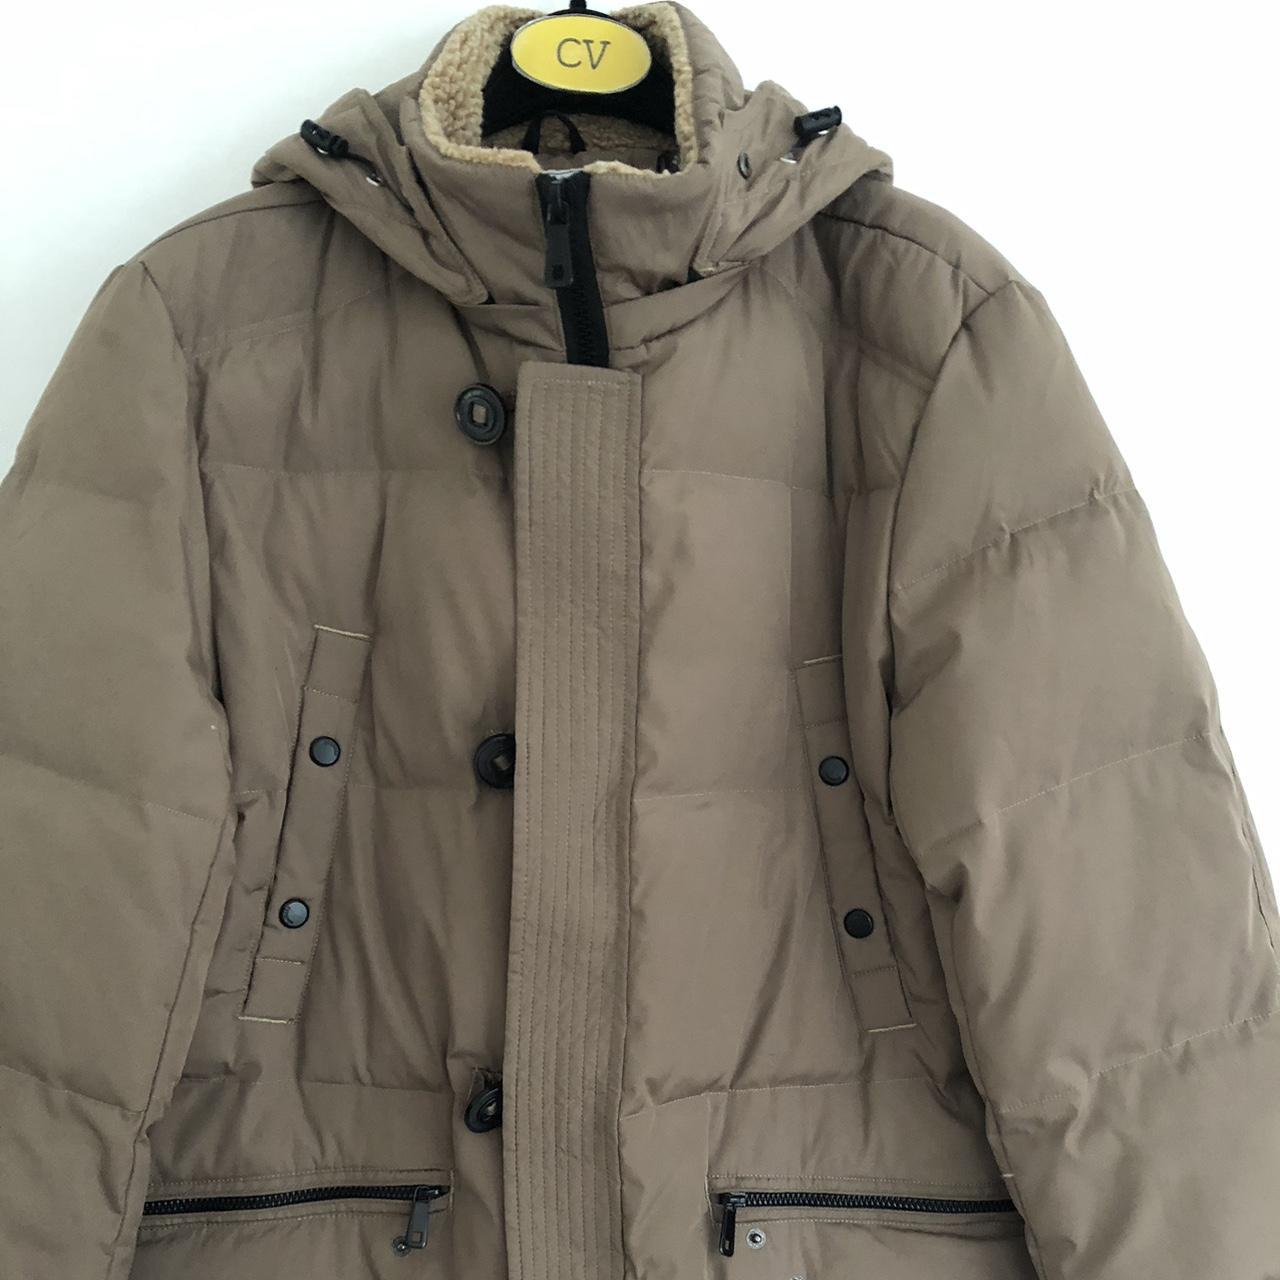 Stone Island Padded Jacket with lots of pockets on... - Depop